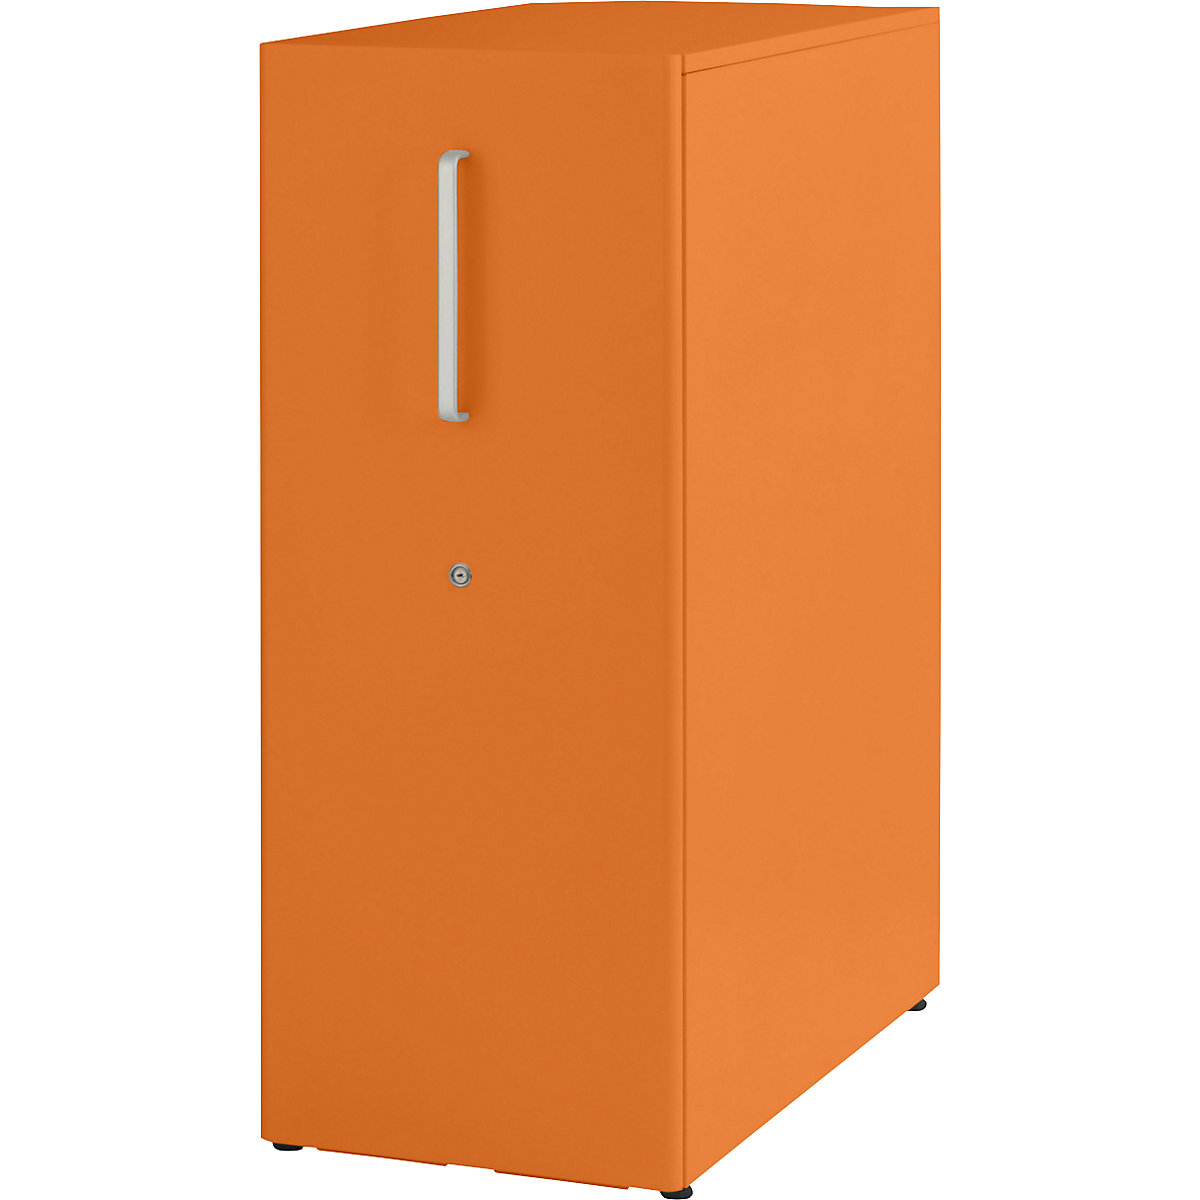 Tower™ 3 add-on furniture, with worktop – BISLEY, for the right side, 3 shelves, orange-6